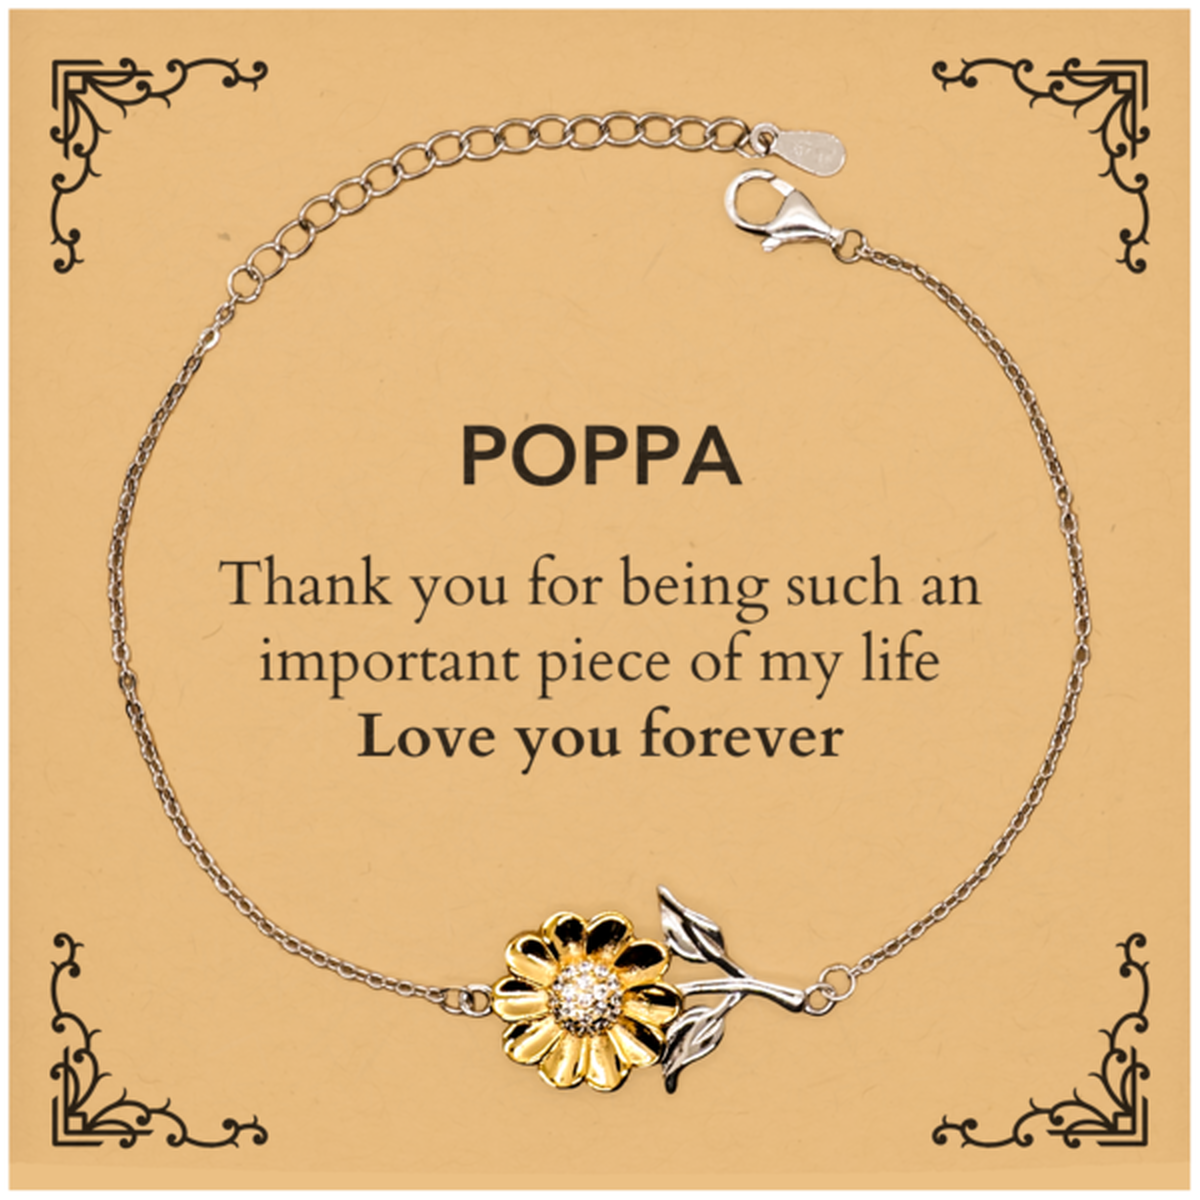 Appropriate Poppa Sunflower Bracelet Epic Birthday Gifts for Poppa Thank you for being such an important piece of my life Poppa Christmas Mothers Fathers Day